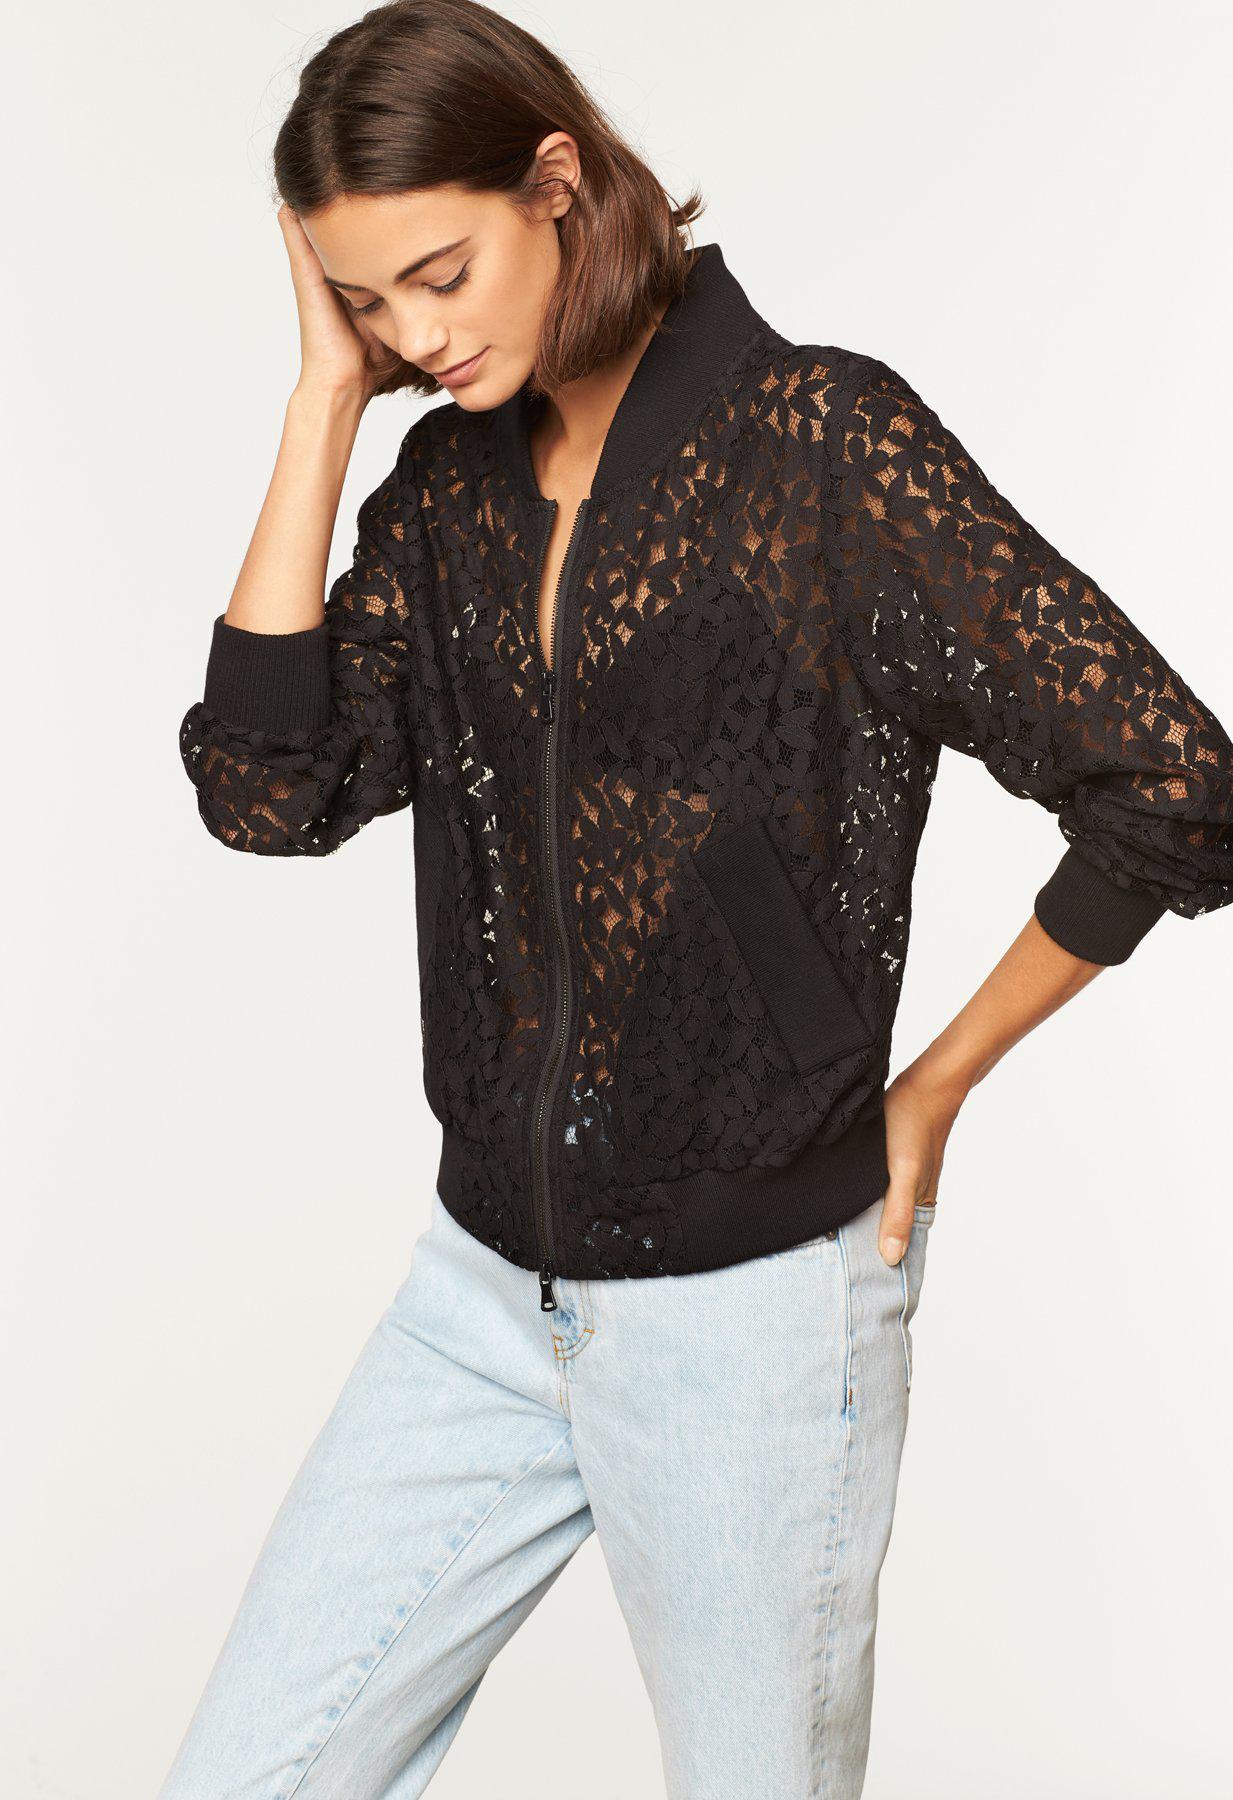 Download MILLY Floral Lace Bomber Jacket in Black - Lyst